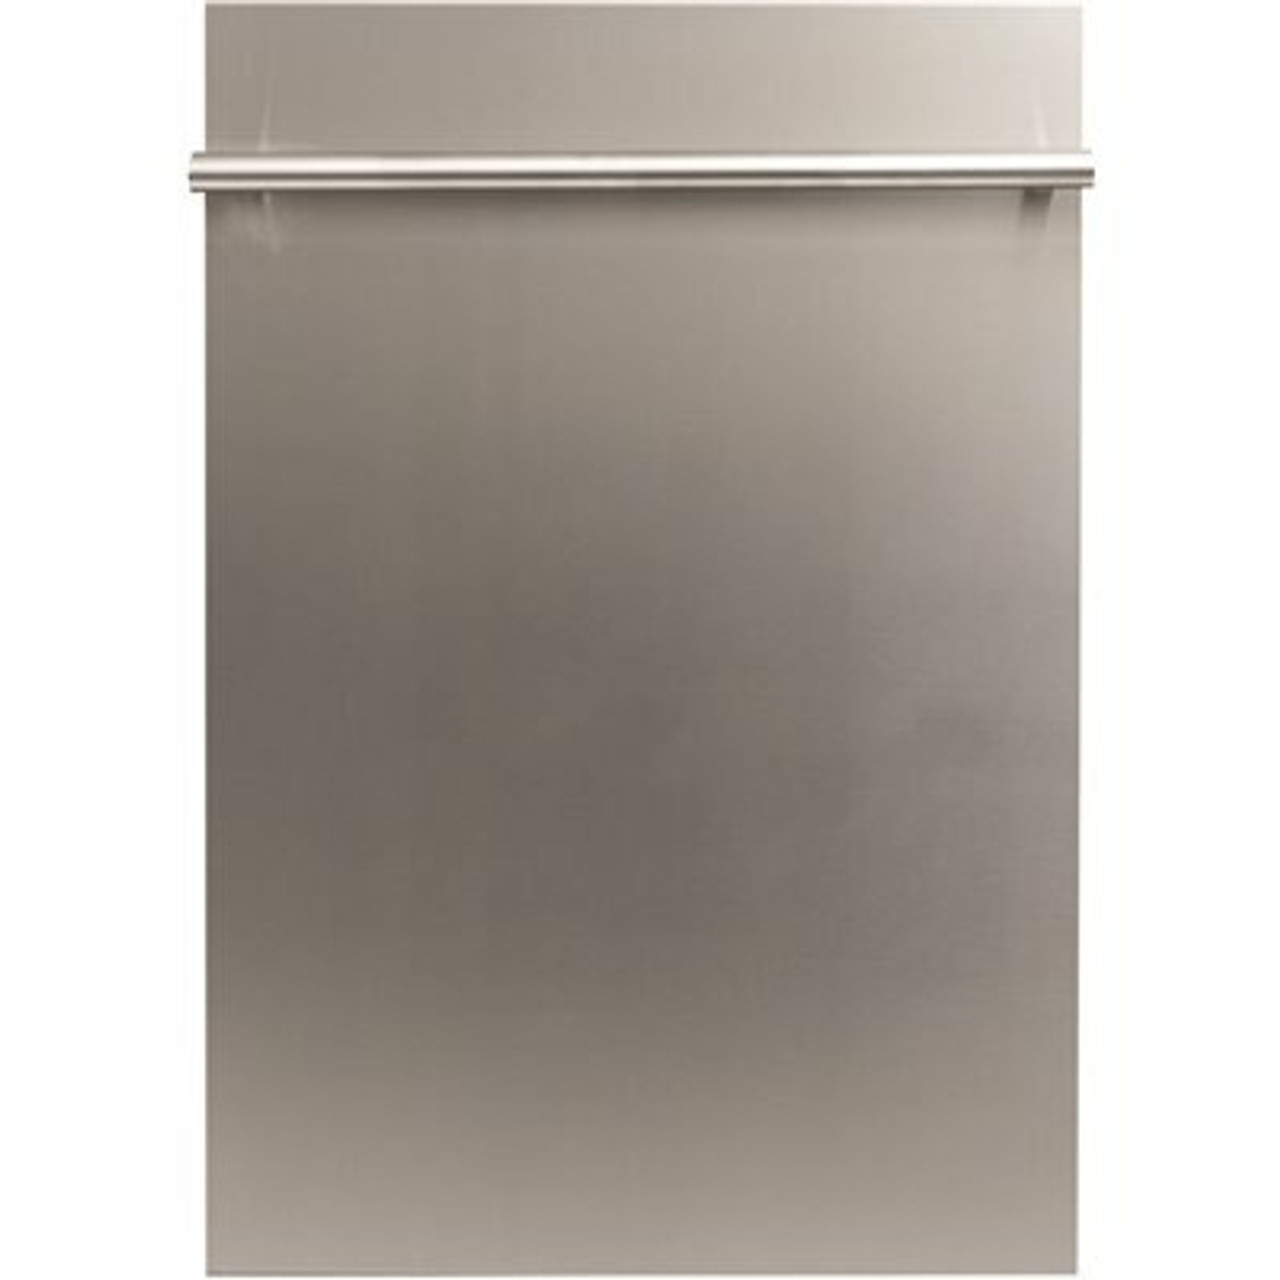 Zline 18 In. Compact Stainless Steel Top Control Dishwasher With Stainless Steel Tub And Modern Style Handle, 40Dba